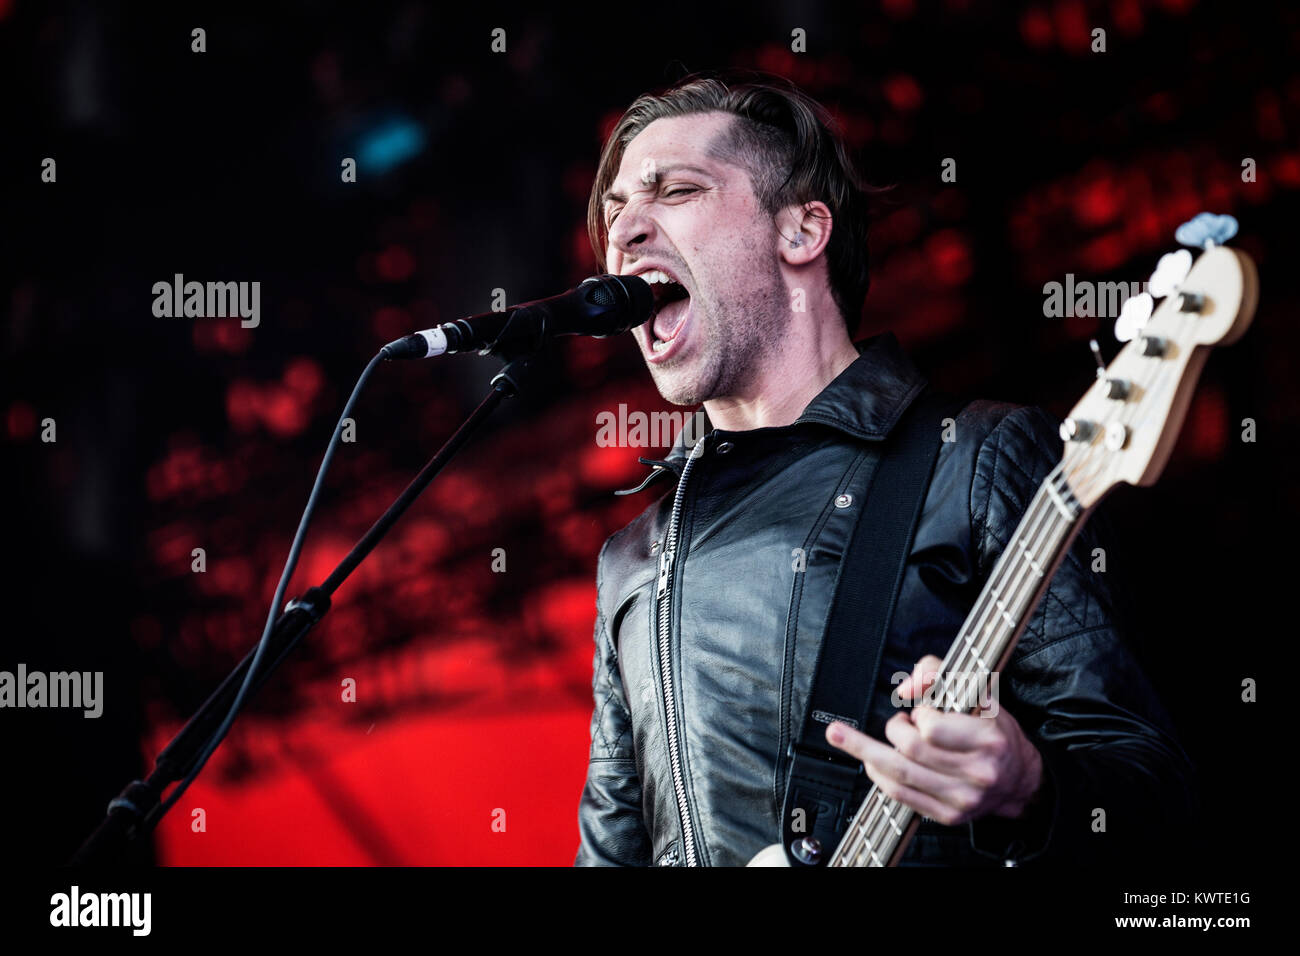 Queens of the Stone Age performing live at Liseberg amusement park  Featuring: Josh Homme, Queens of the Stone Age Where: Gothenburg,  Västergötland and Bohuslän, Sweden When: 09 Jun 2018 Credit: Mats  Andersson/WENN.com